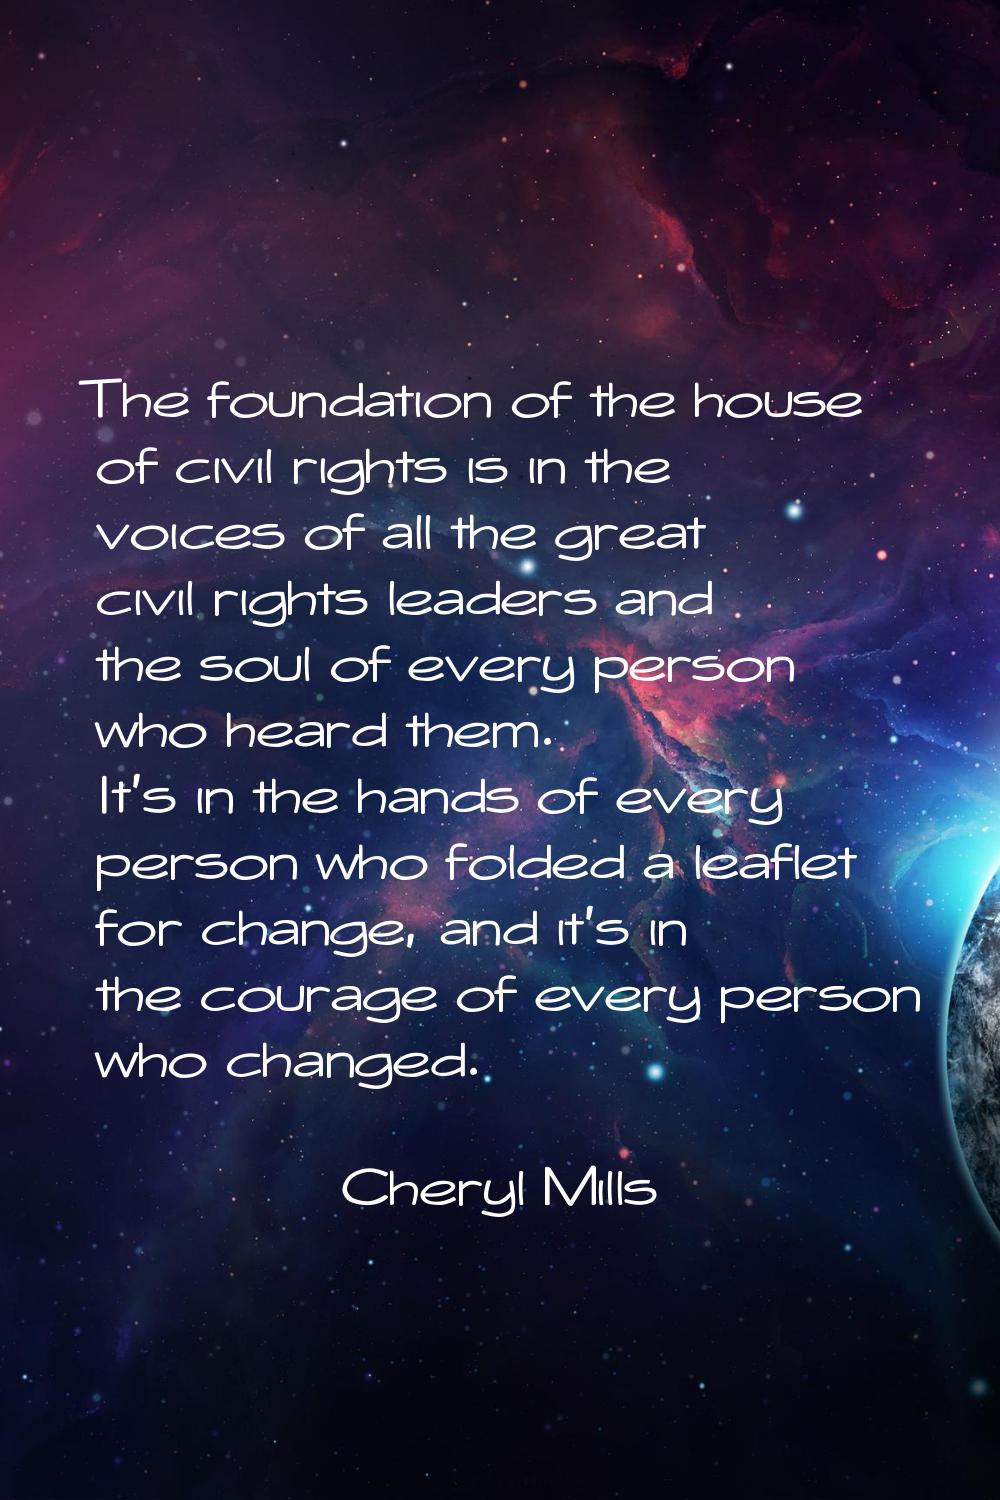 The foundation of the house of civil rights is in the voices of all the great civil rights leaders 